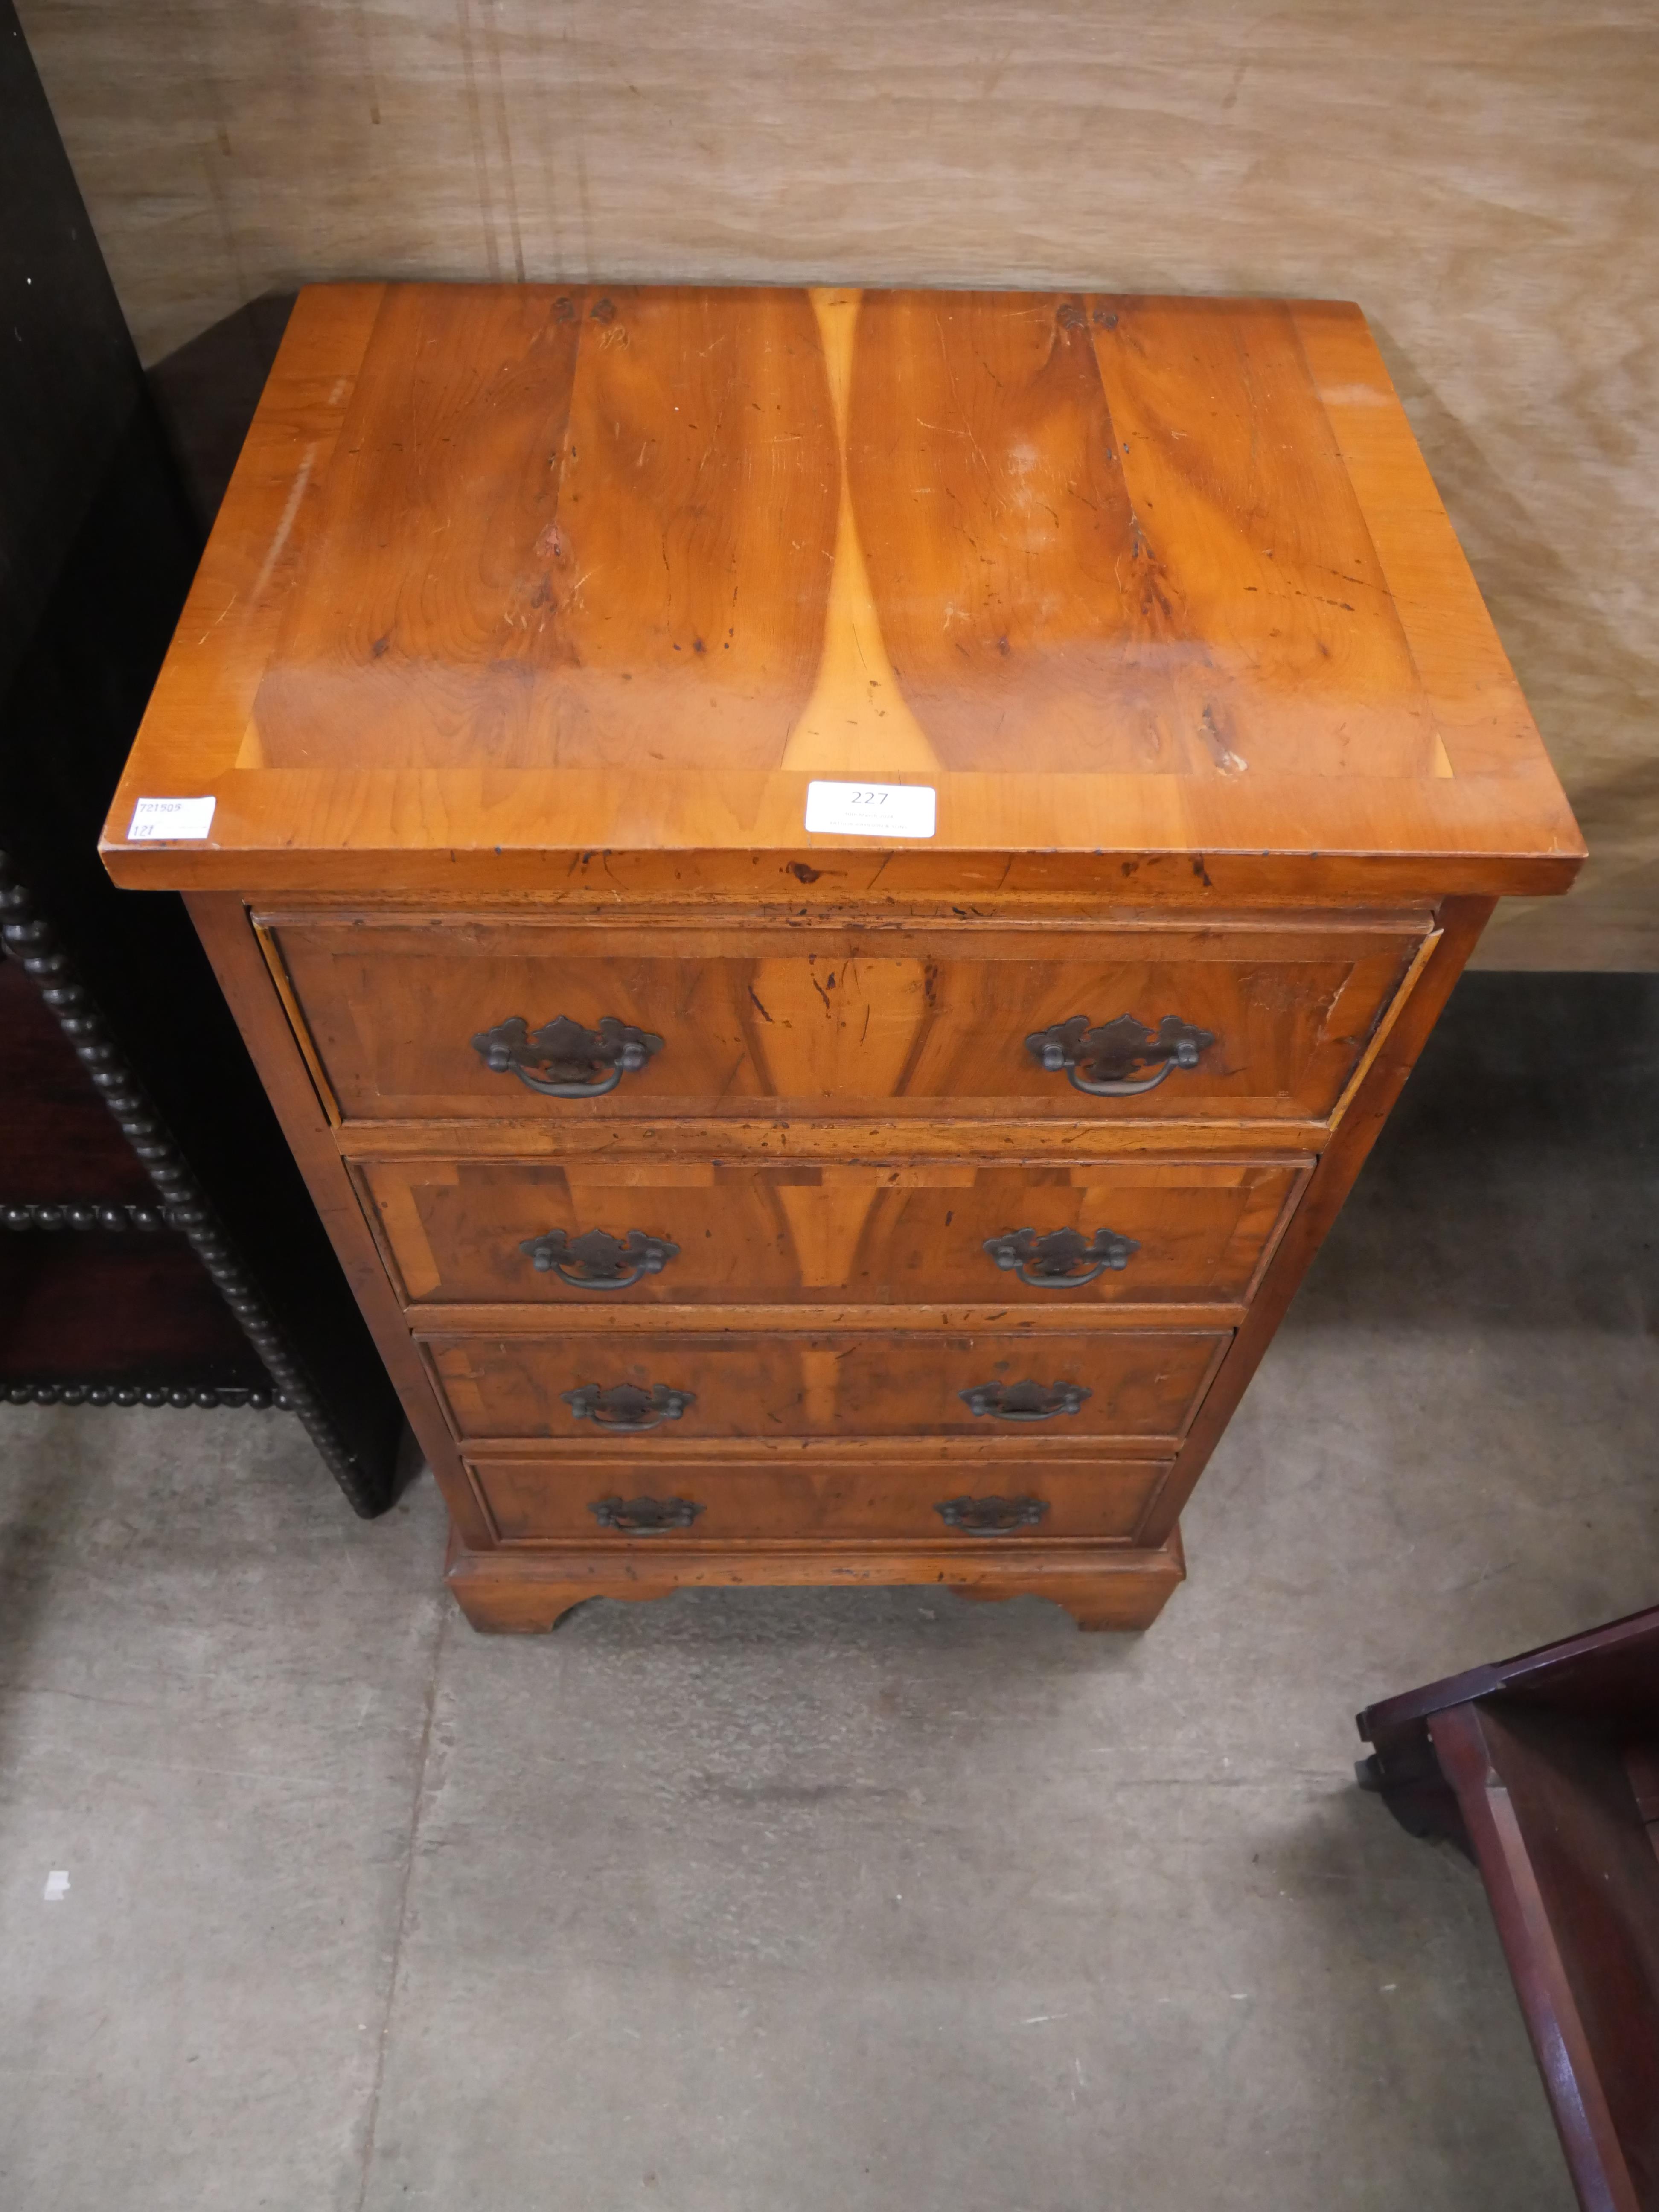 A small George III style yew wood chest of drawers - Image 3 of 3